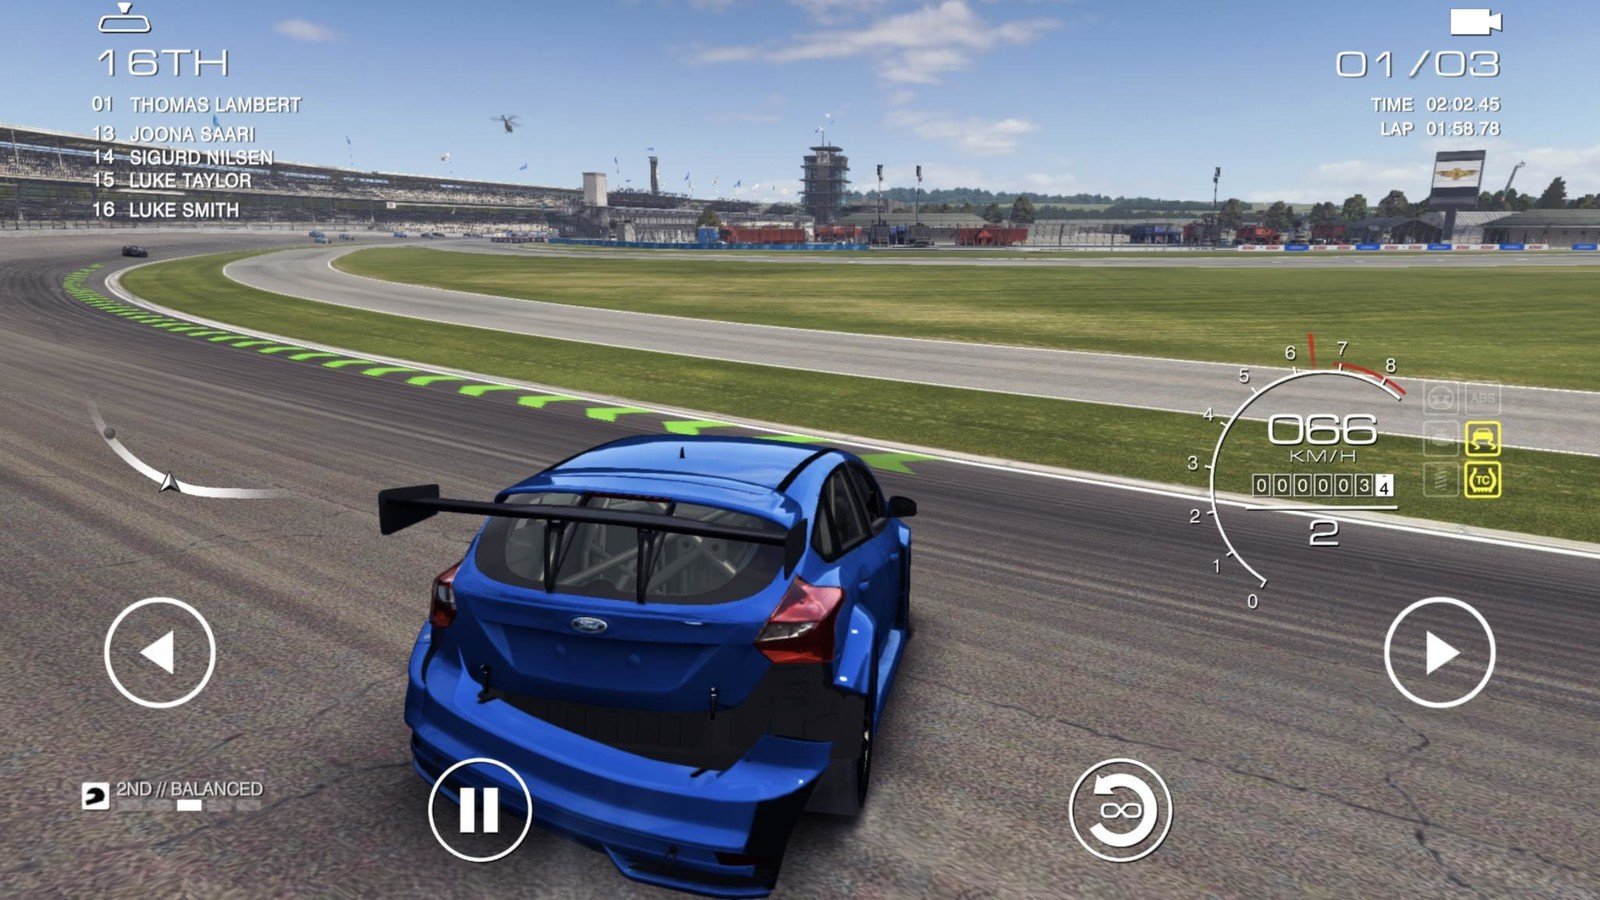 Sign up for the second GRID Autosport beta test on Android